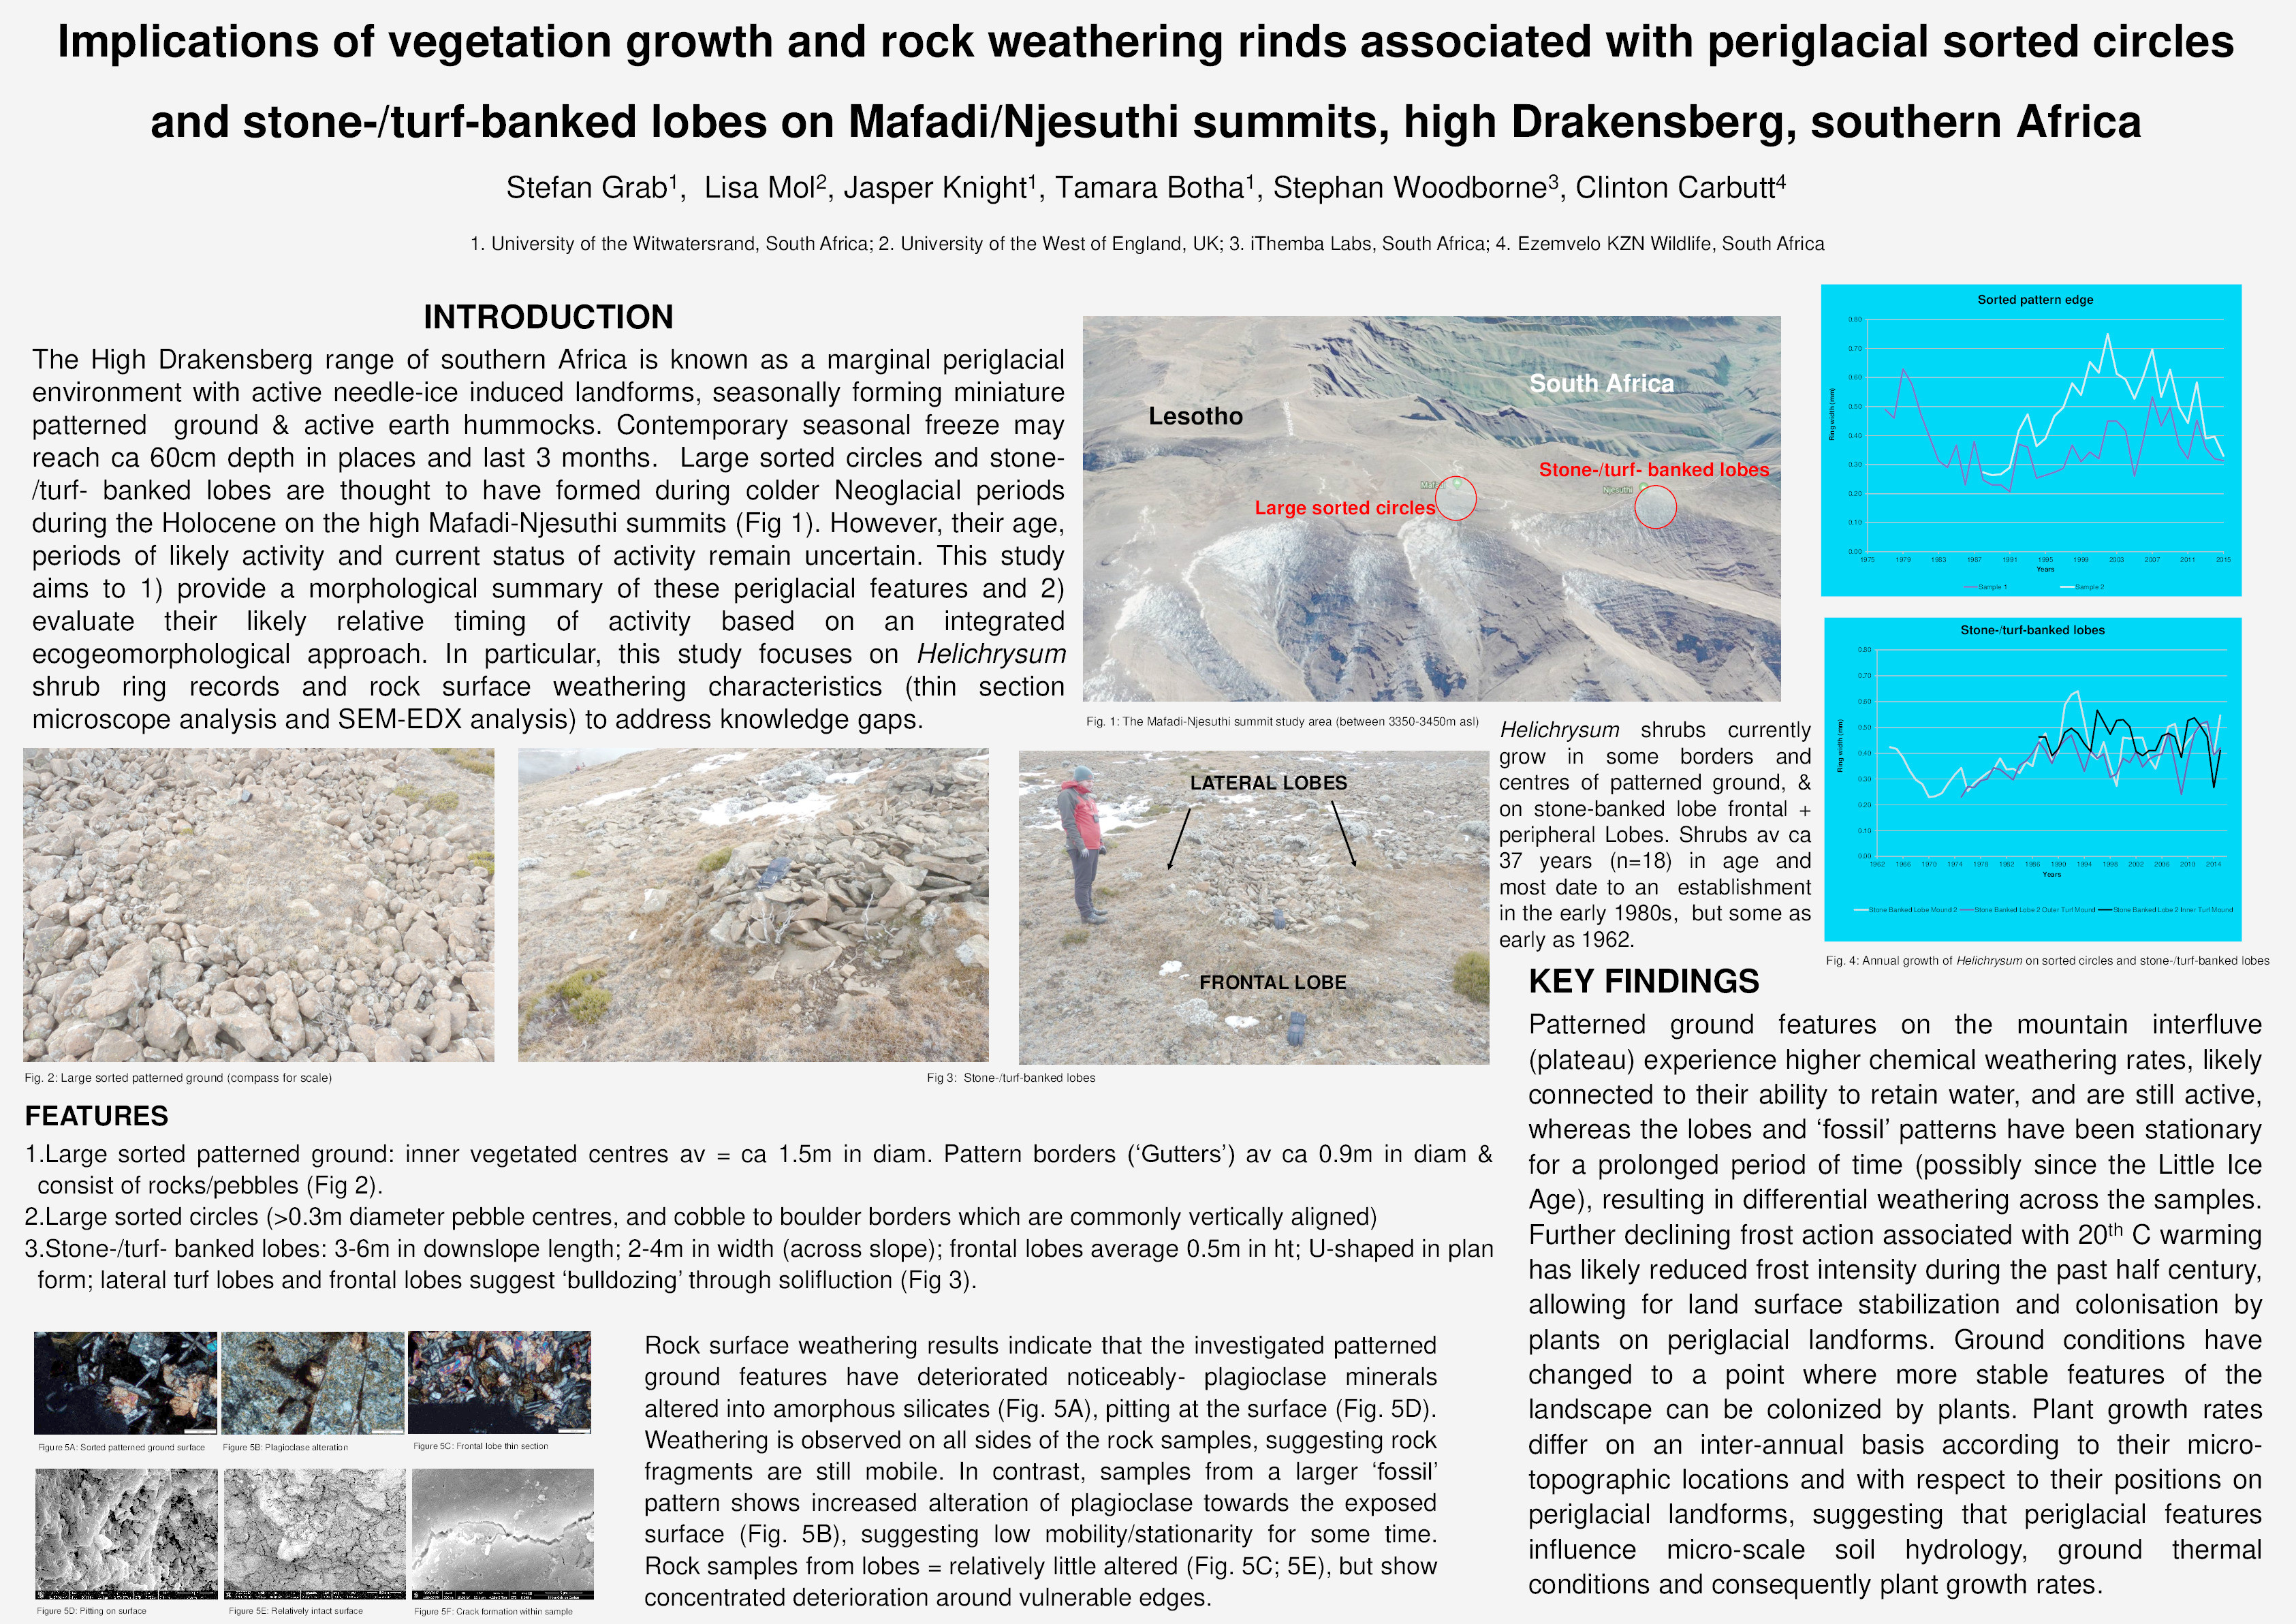 Implications of vegetation growth and rock weathering rinds associated with periglacial sorted circles and stone-/turf-banked lobes on Mafadi/Njesuthi summits, high Drakensberg, southern Africa Thumbnail